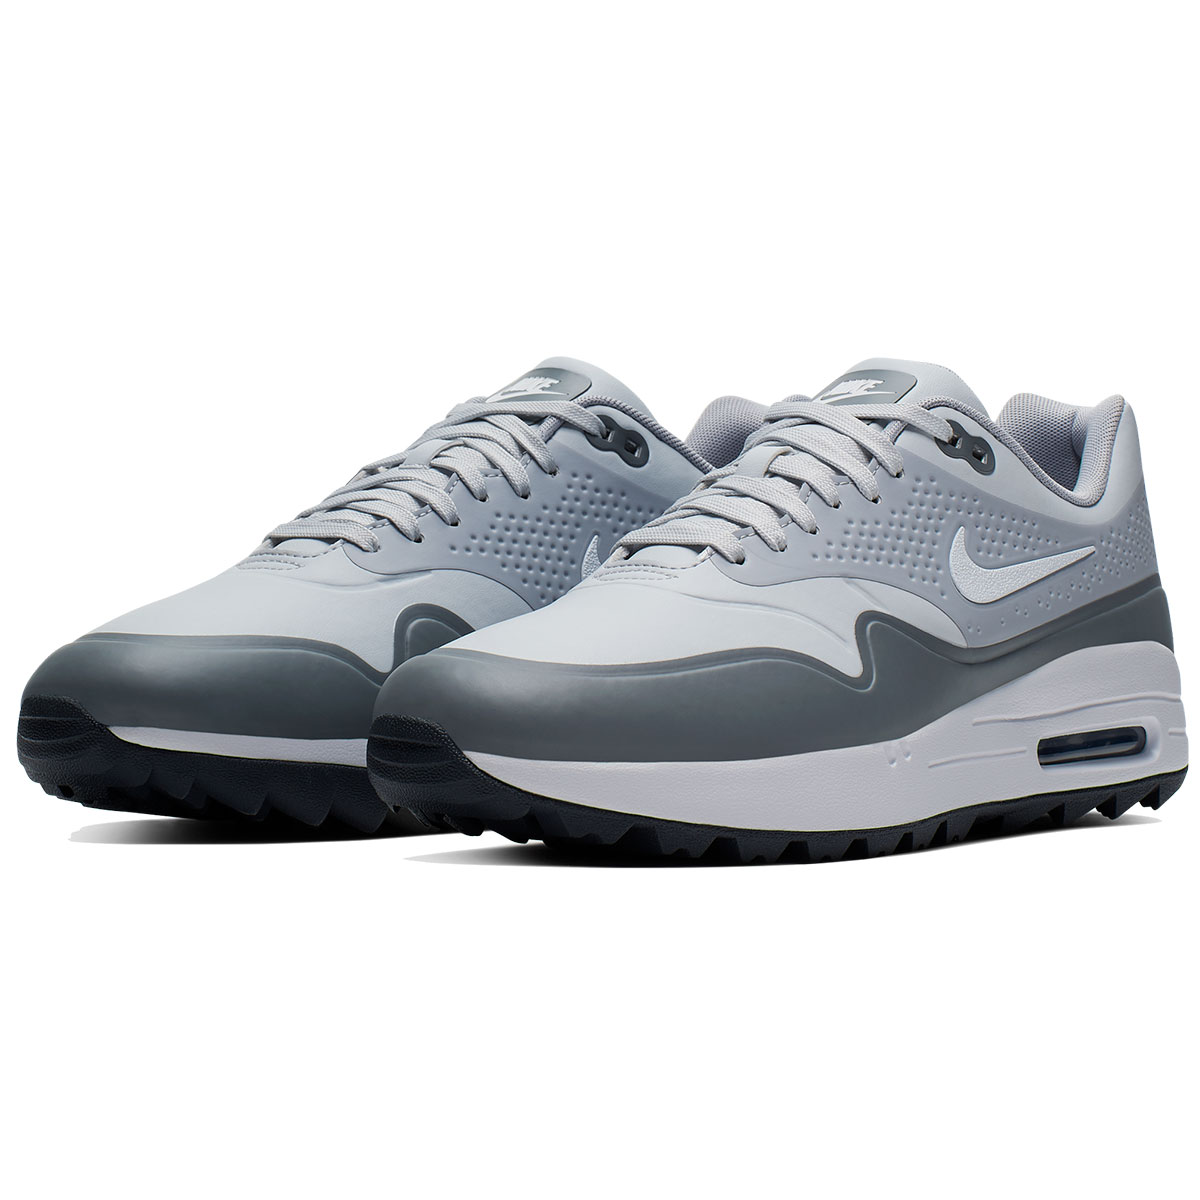 nike air max 1 golf shoes review